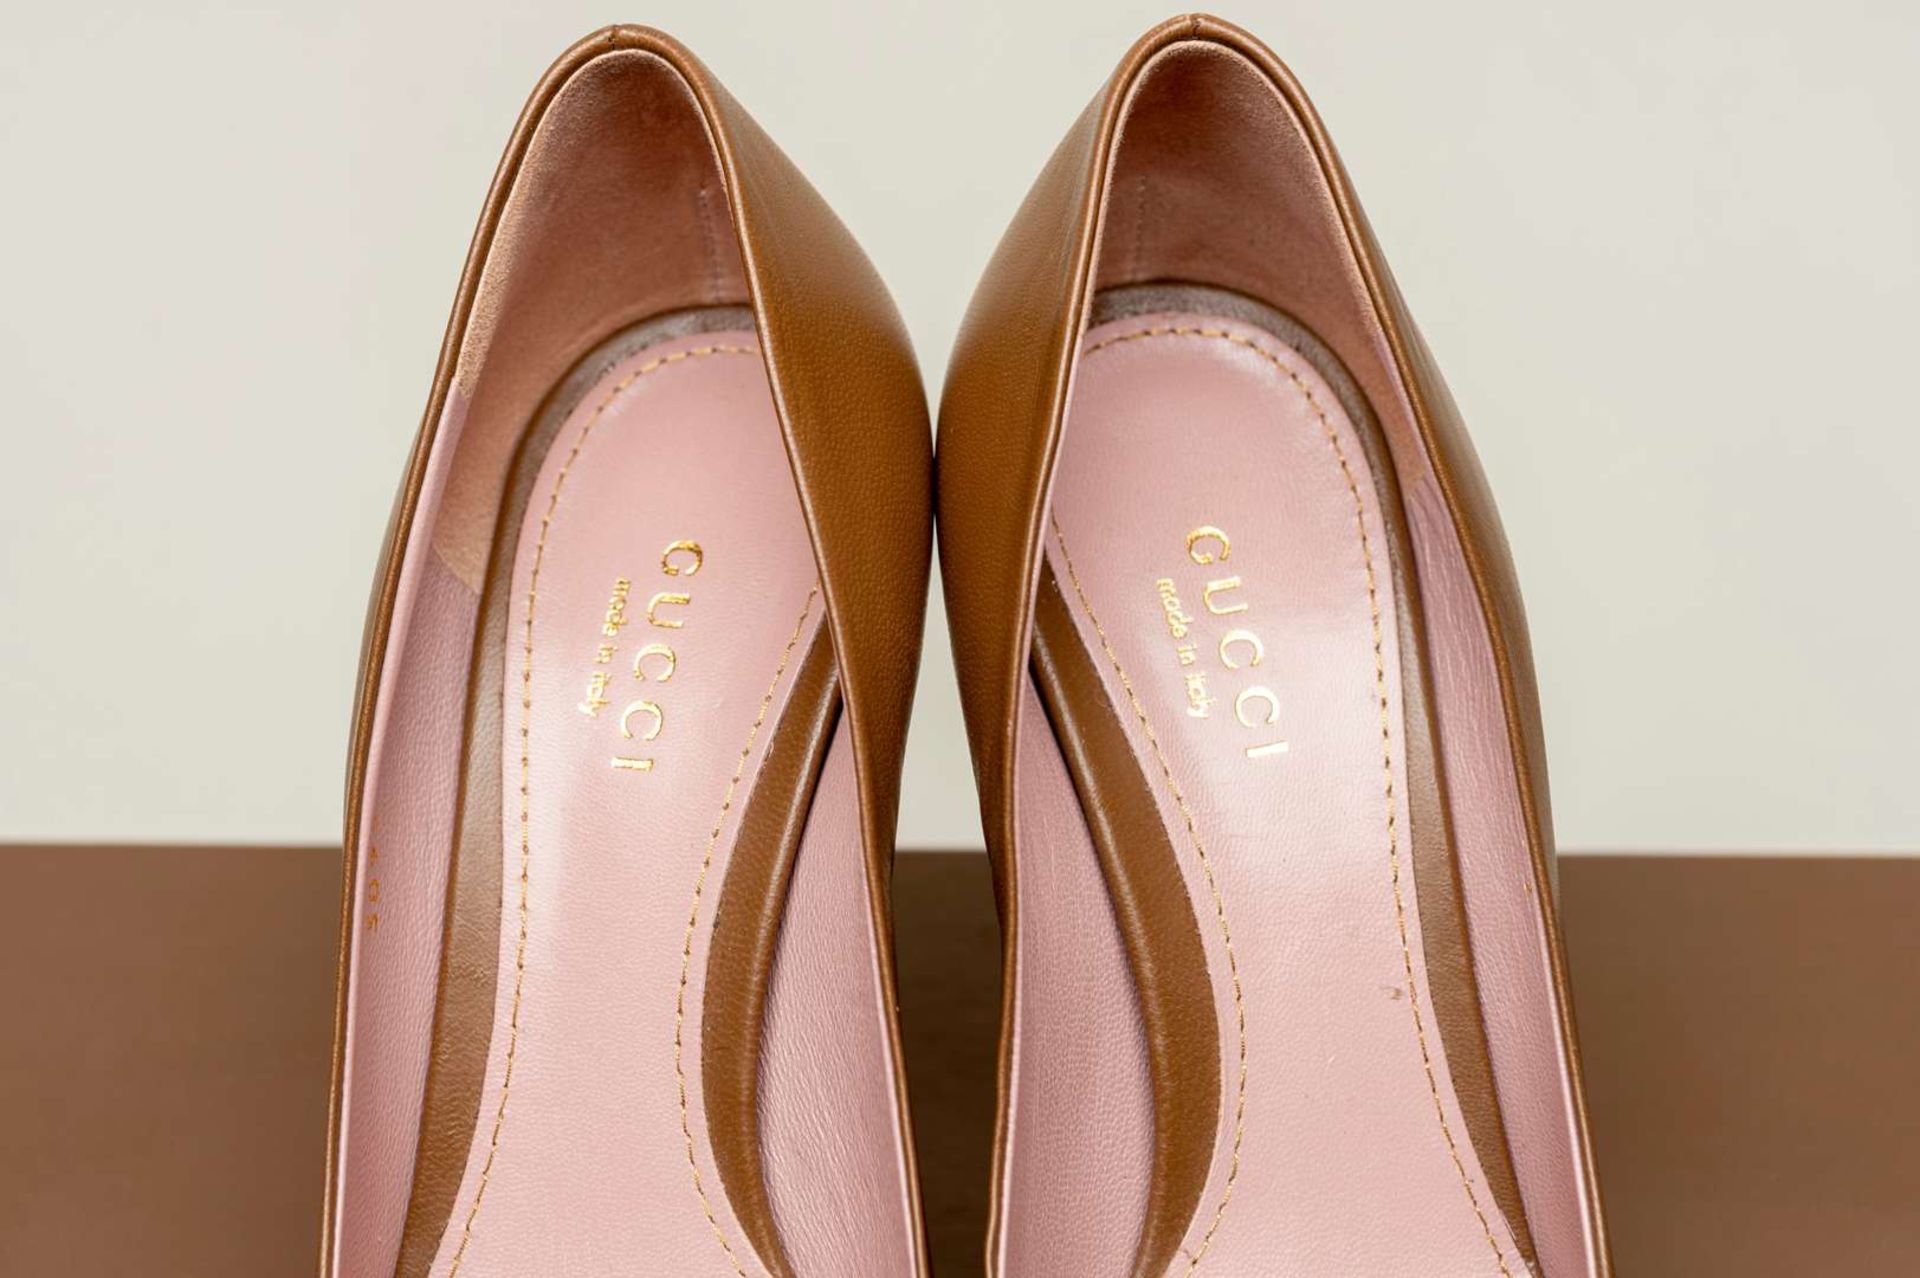 GUCCI, a pair of moca brown leather high heels - Image 3 of 6